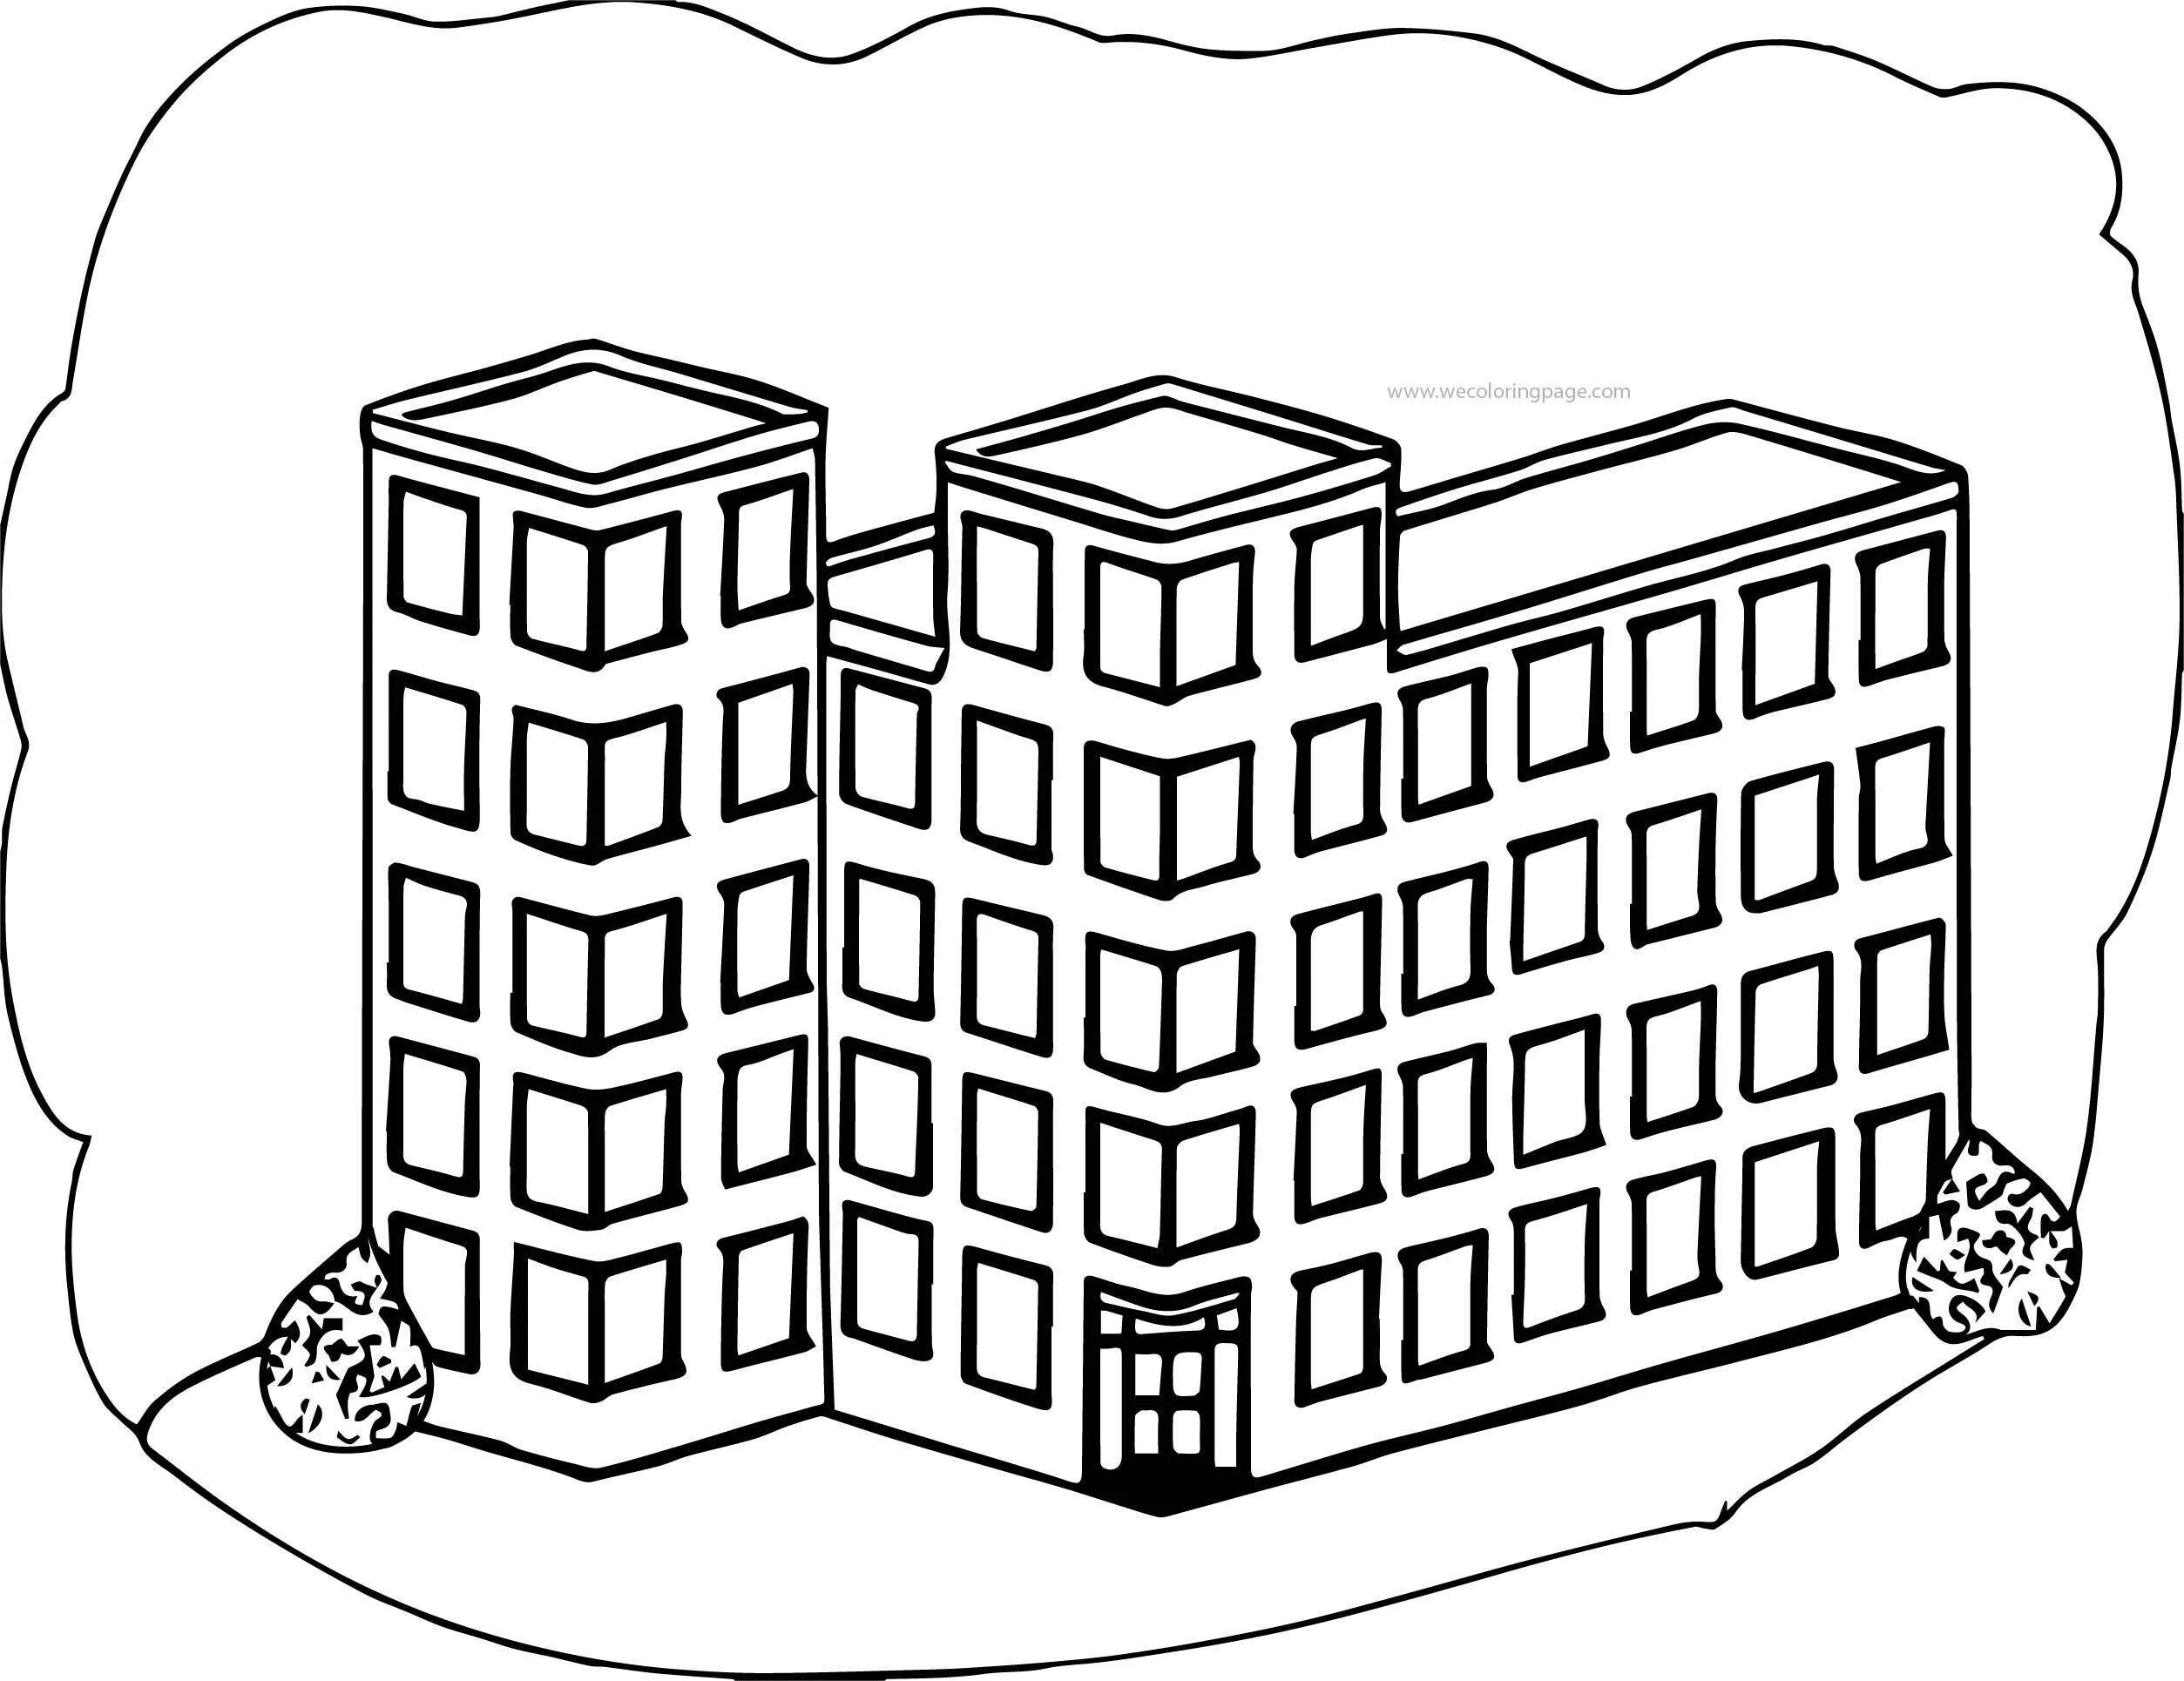 Dazzling high-rise building coloring book for kids